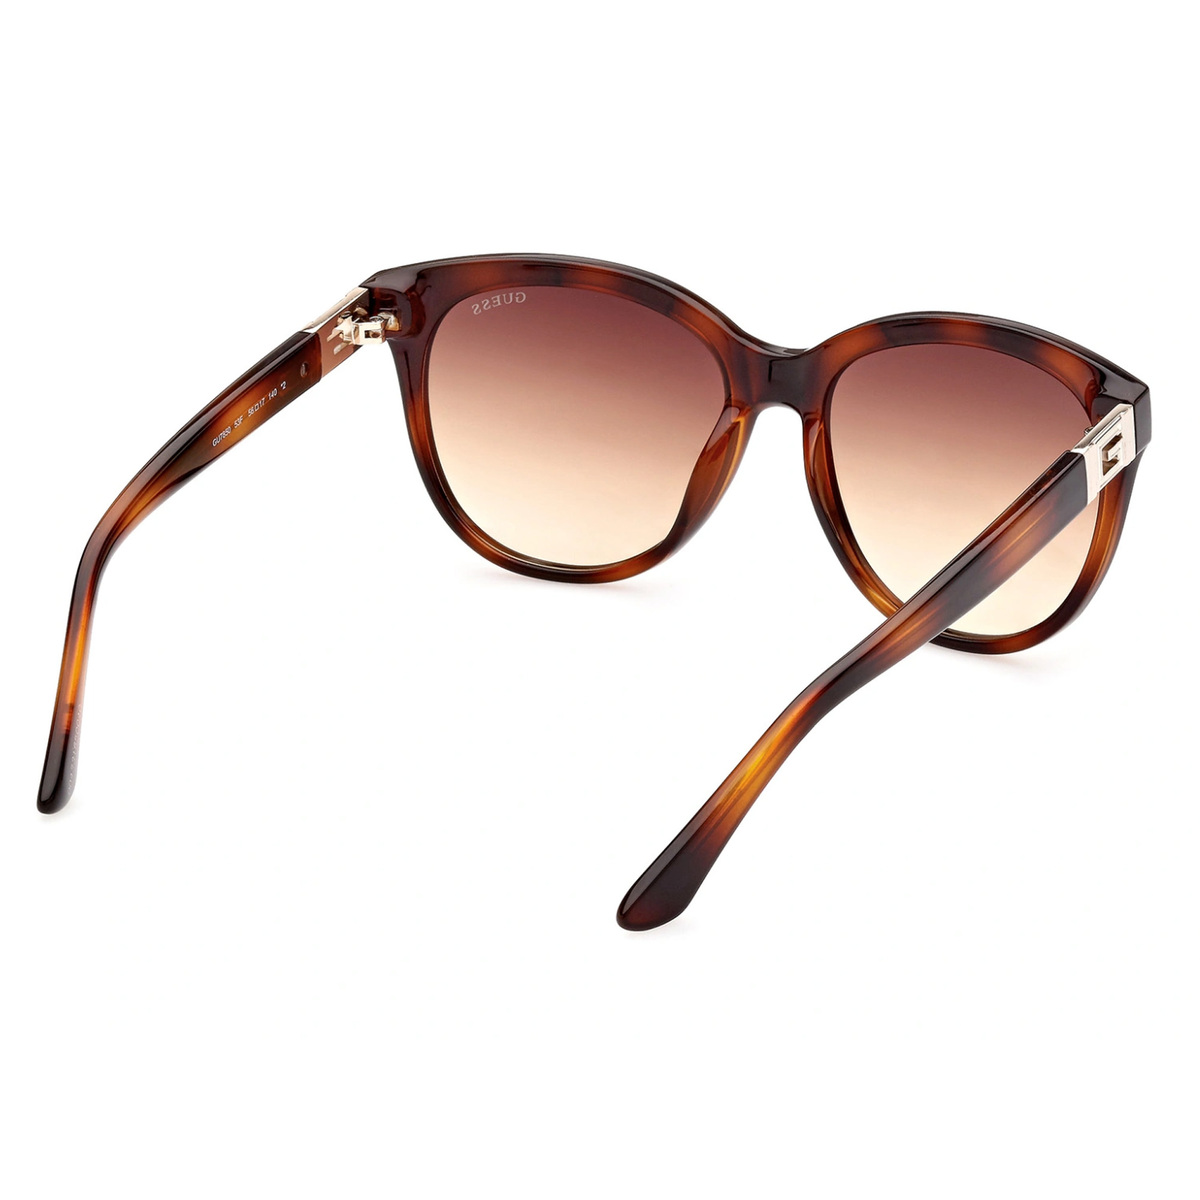 Guess Women's Rectangle Sunglasses, Gradiant Brown, 785053F56